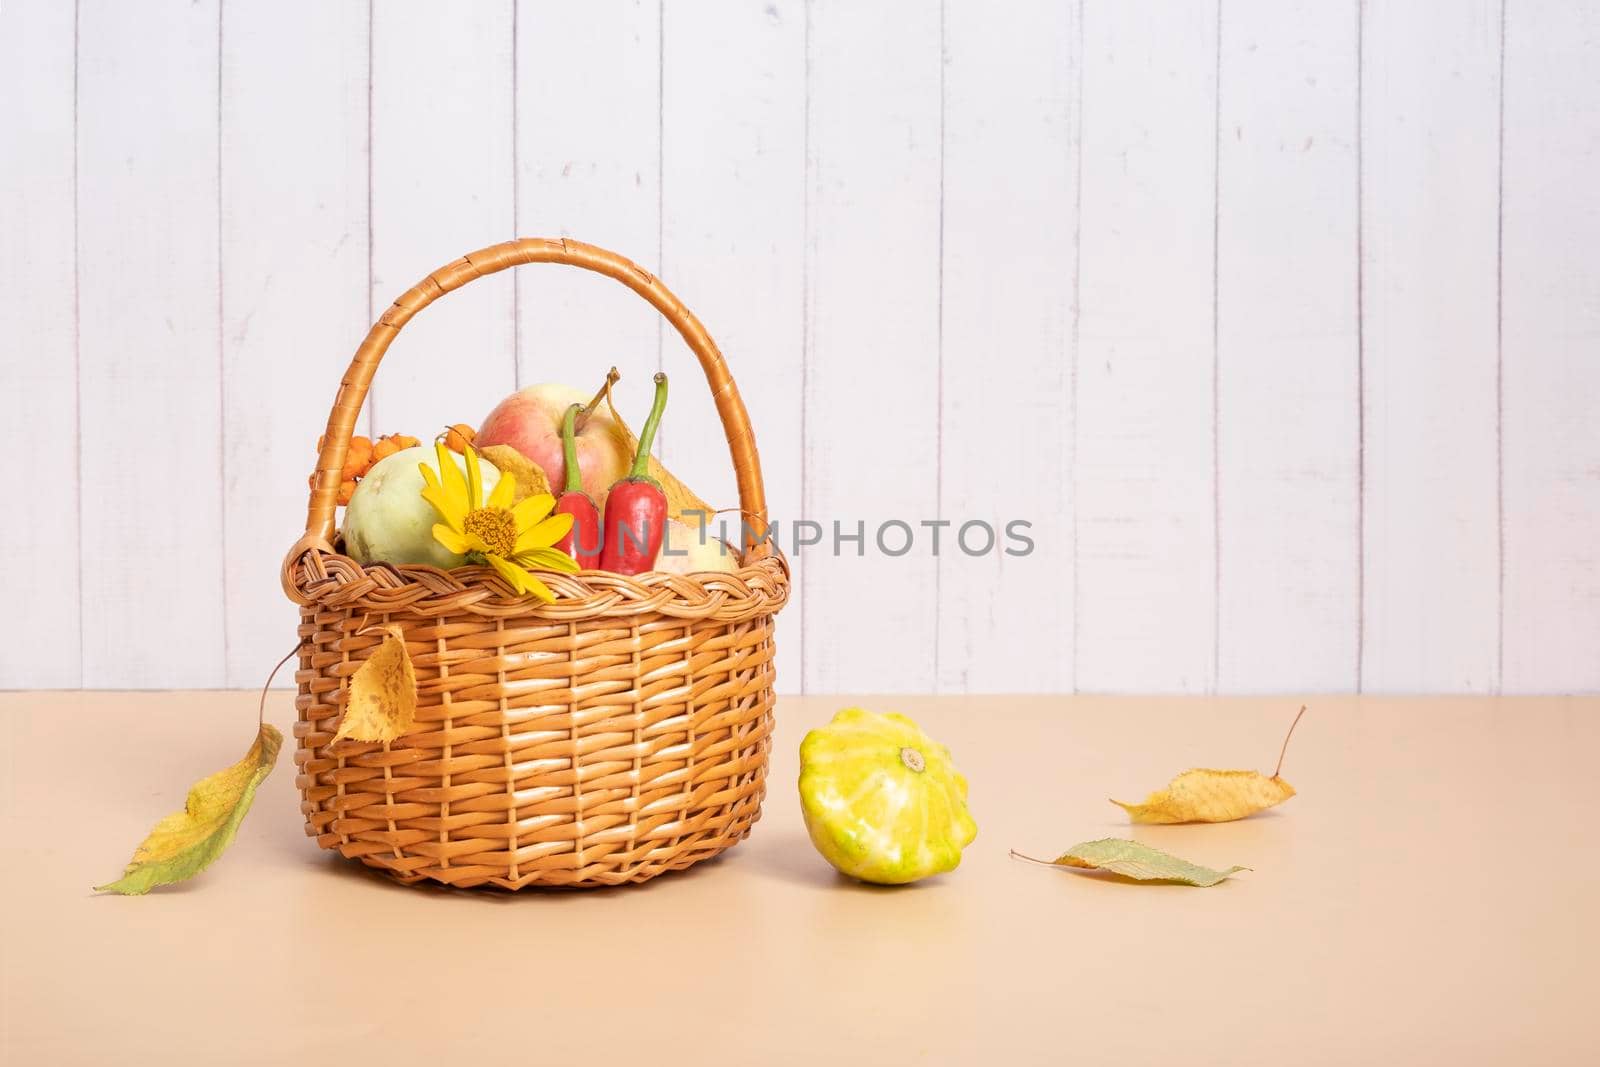 Autumn harvest basket with corn, apples, zucchini and peppers on a wooden background decorated with autumn flower.